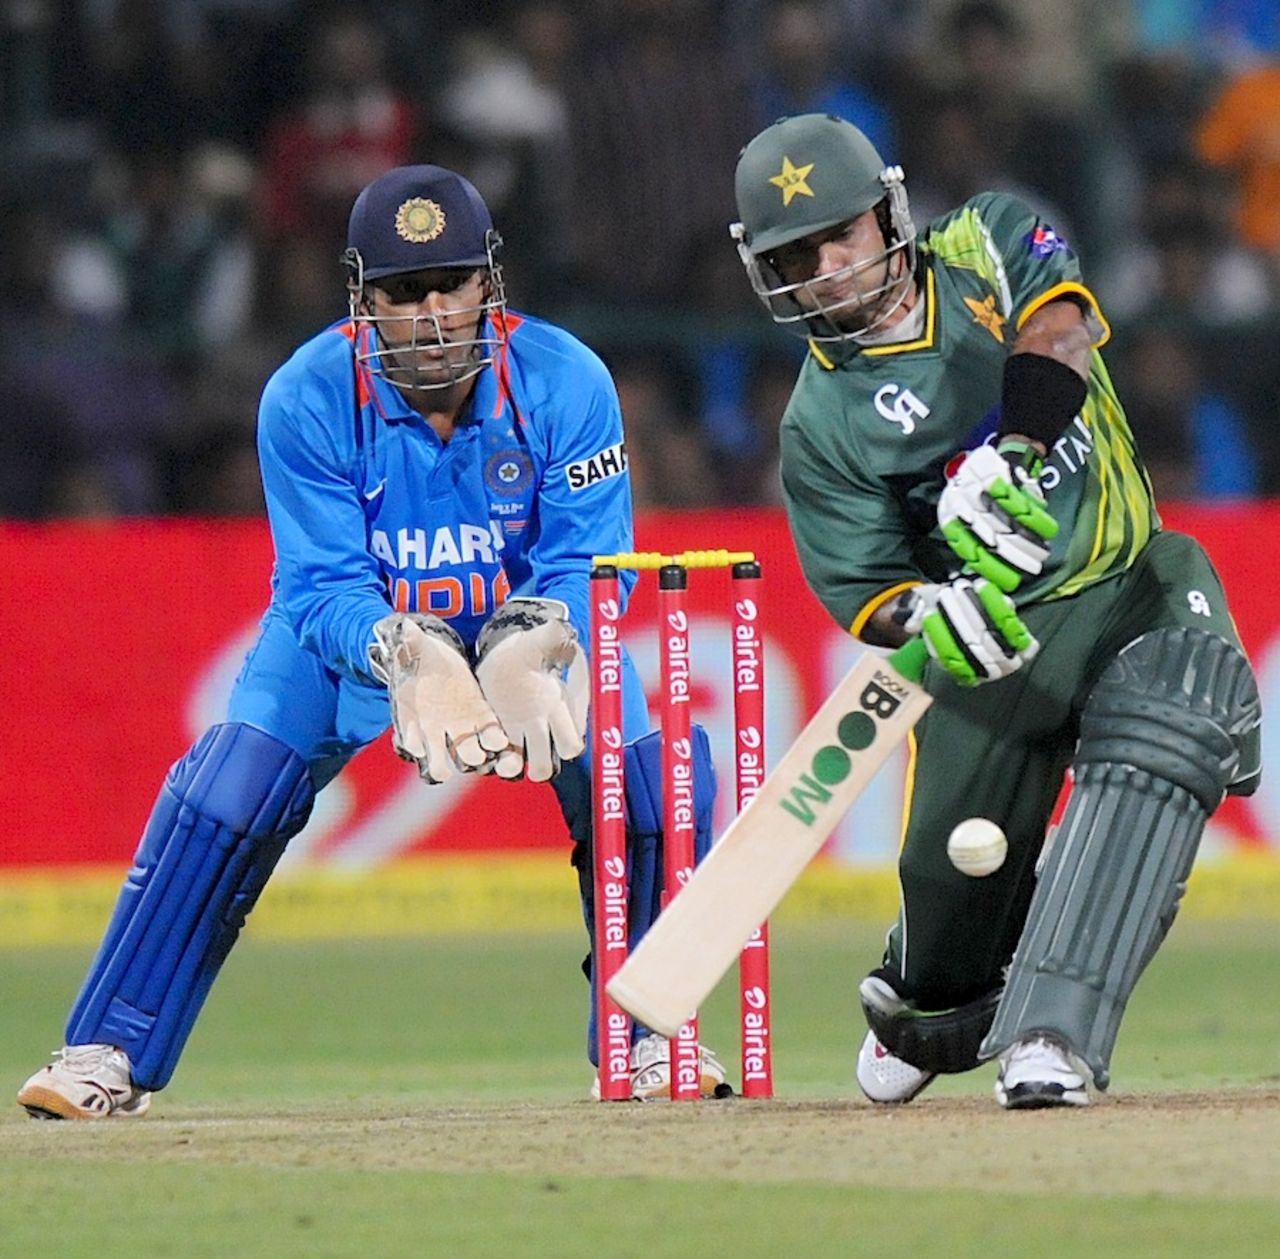 Mohammad Hafeez targets the deep-midwicket boundary, India v Pakistan, 1st T20, Bangalore, December 25, 2012